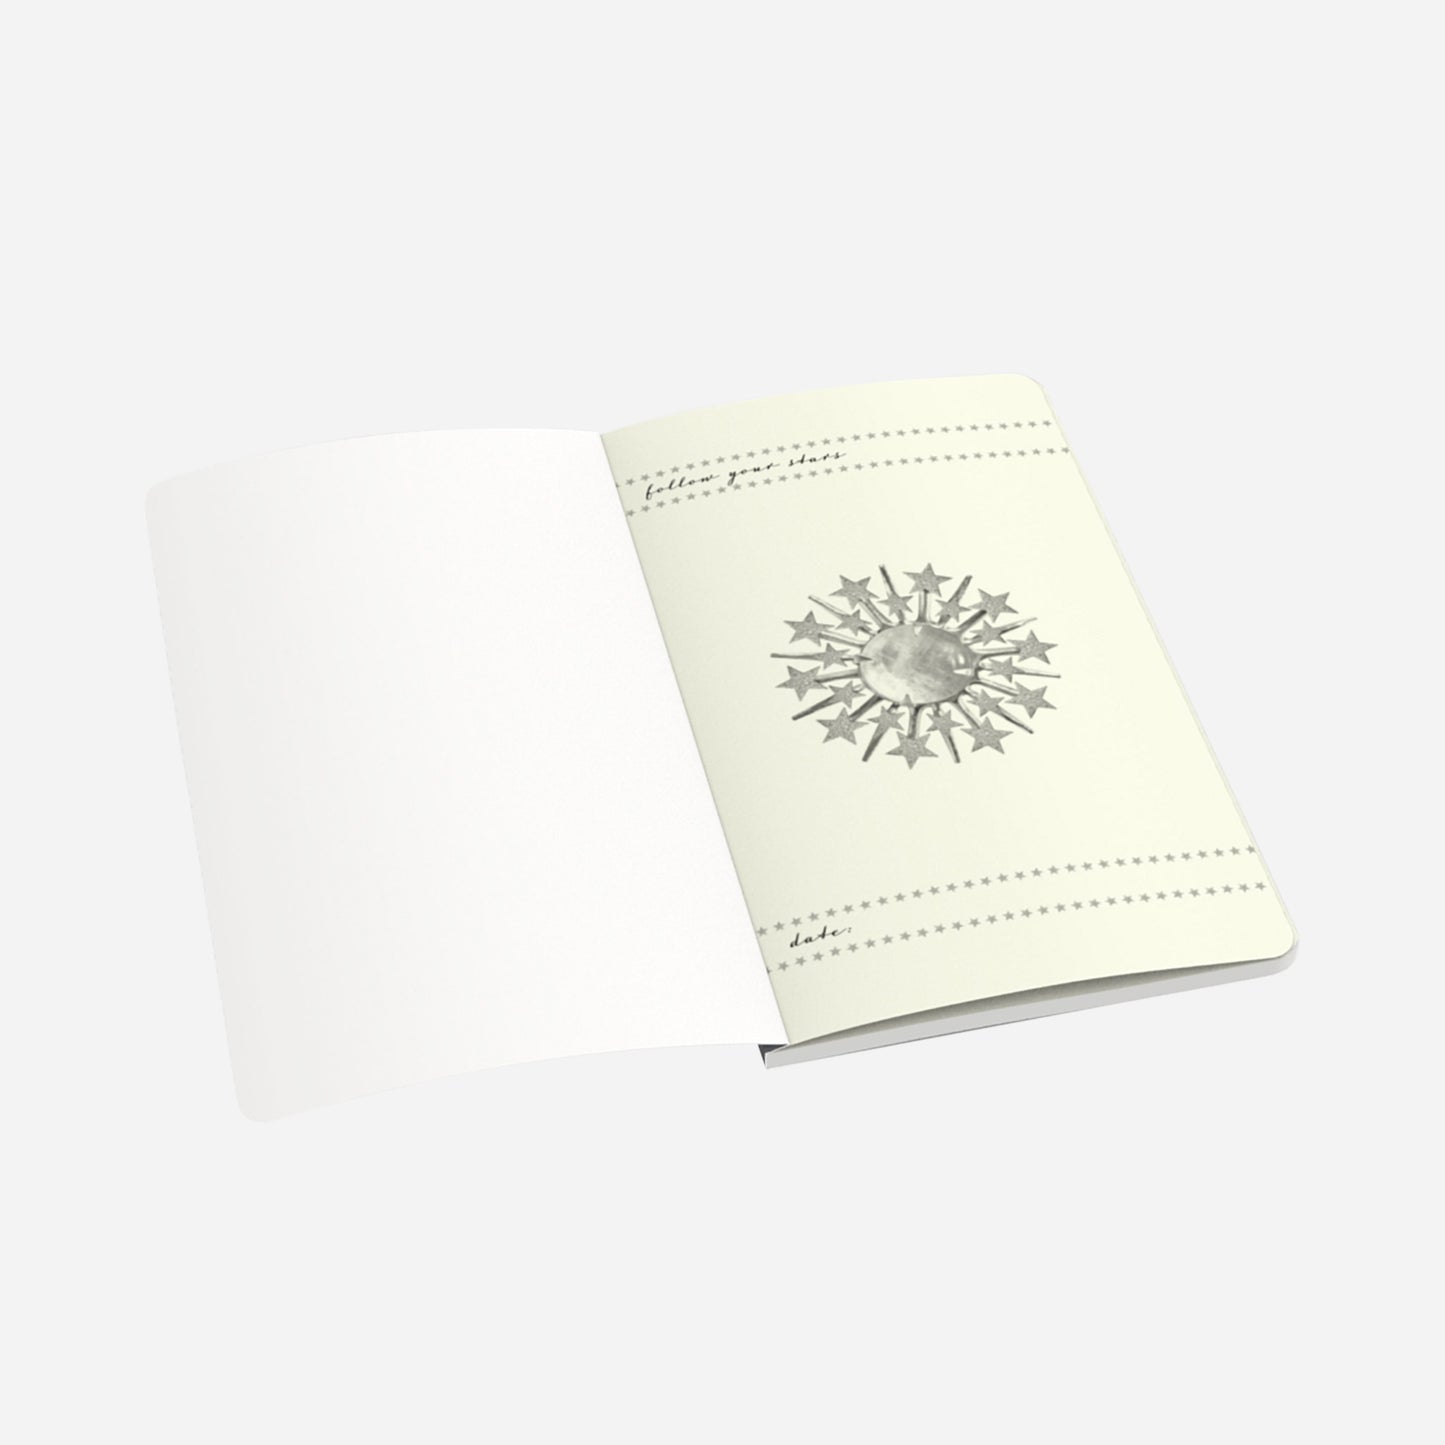 first page of small notebook with follow your stars and date with a moonstone in the middle and star borders on the top and bottom of the page